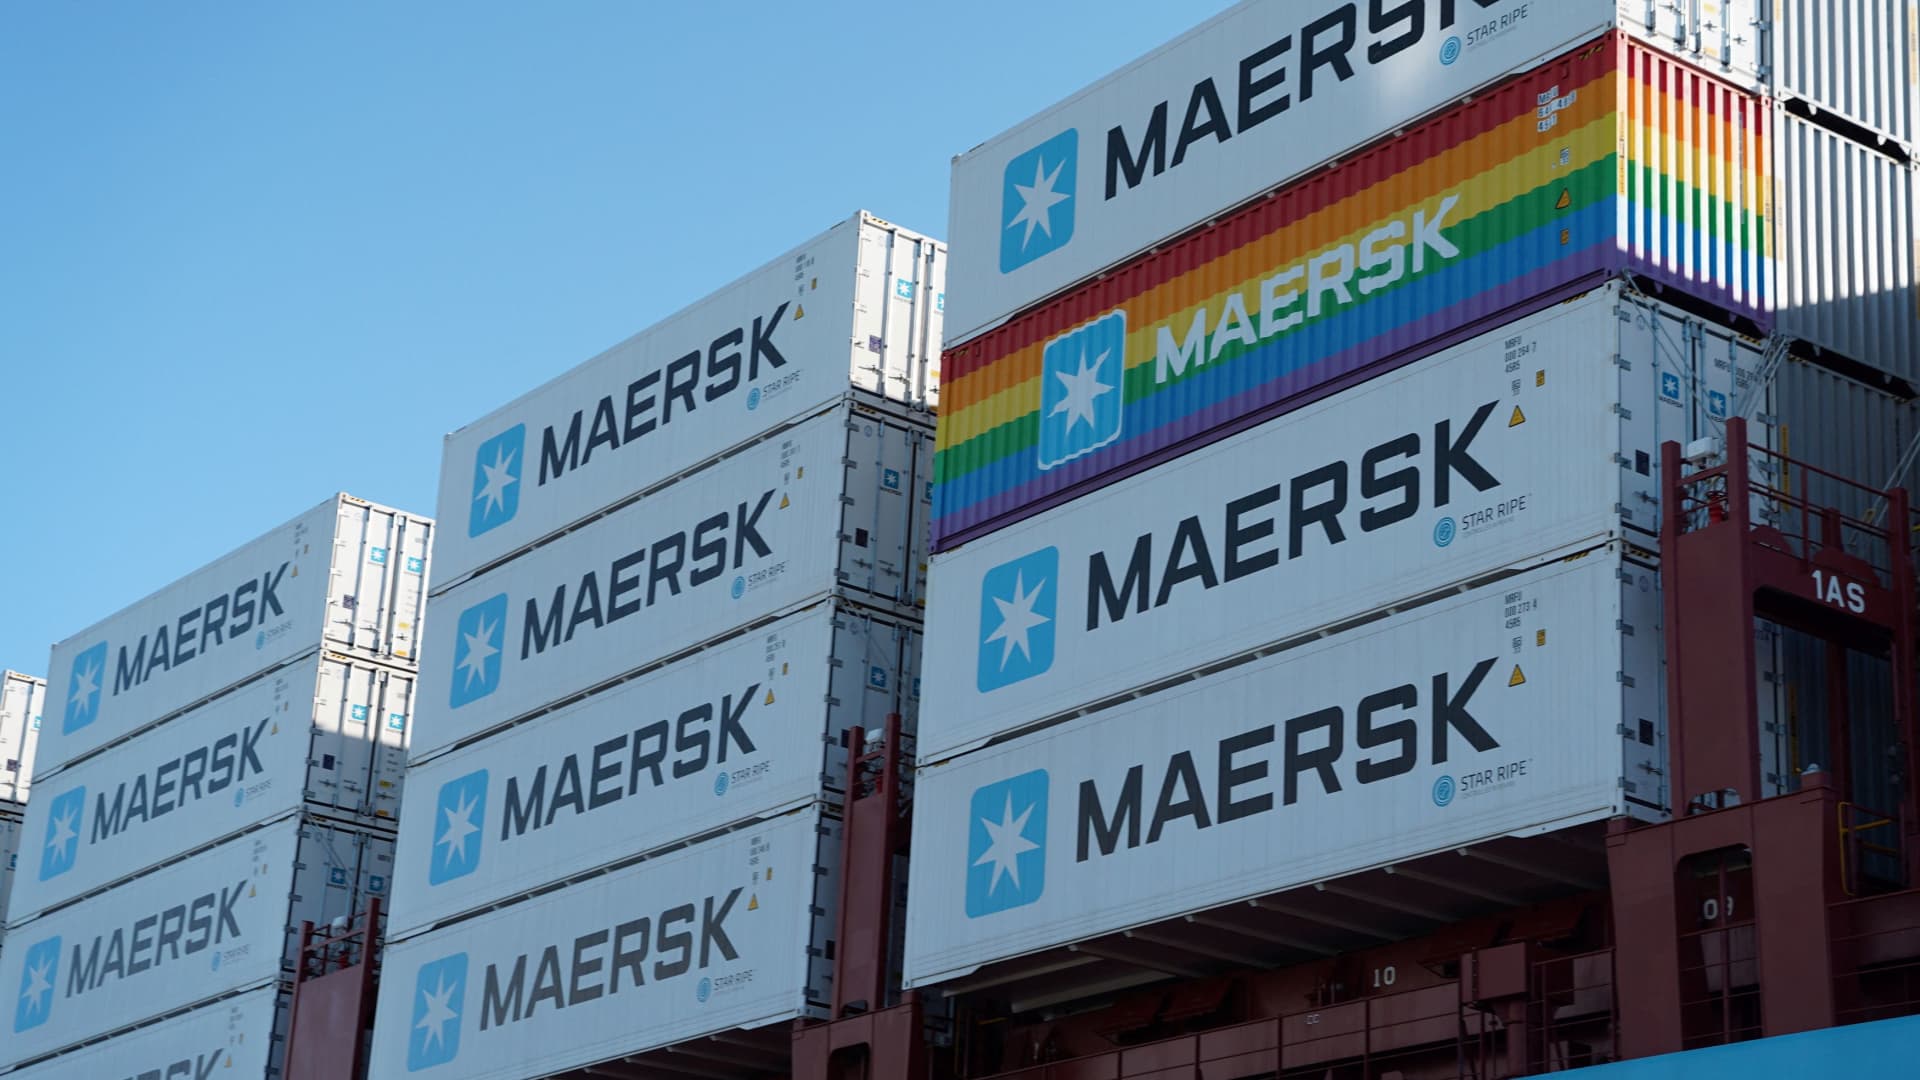 Maersk pauses Purple Sea sailings immediately after Houthi assault on container ship